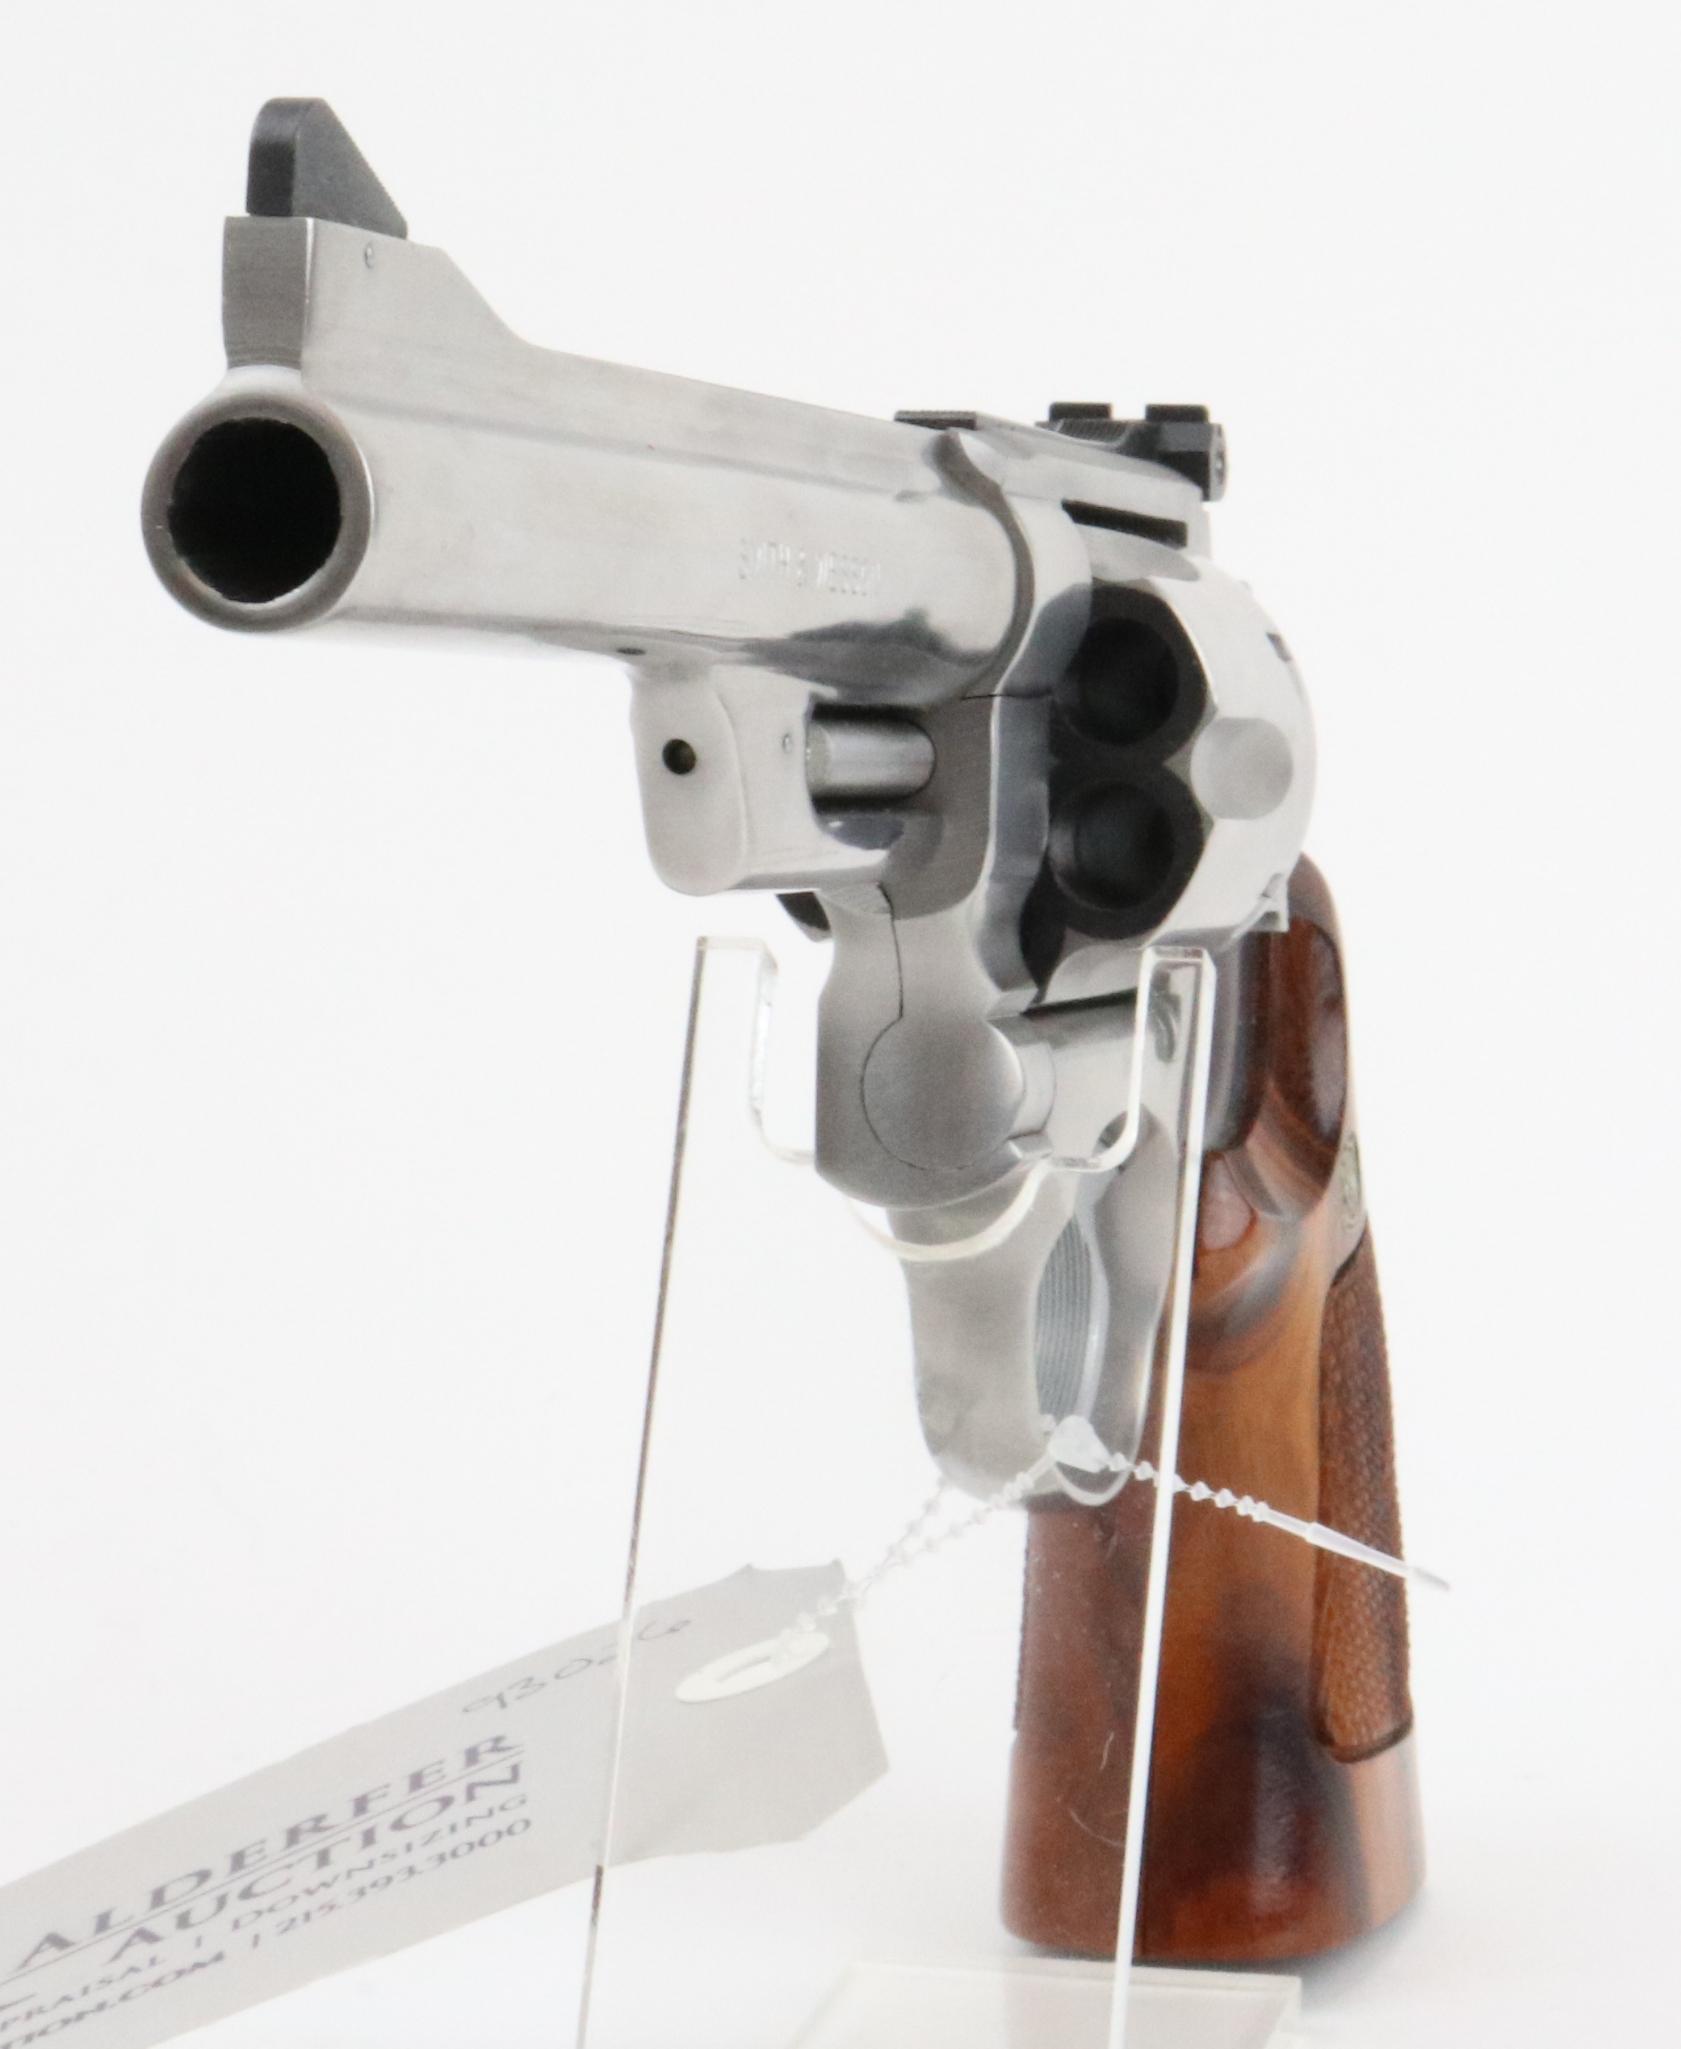 Smith & Wesson 624 double action revolver.